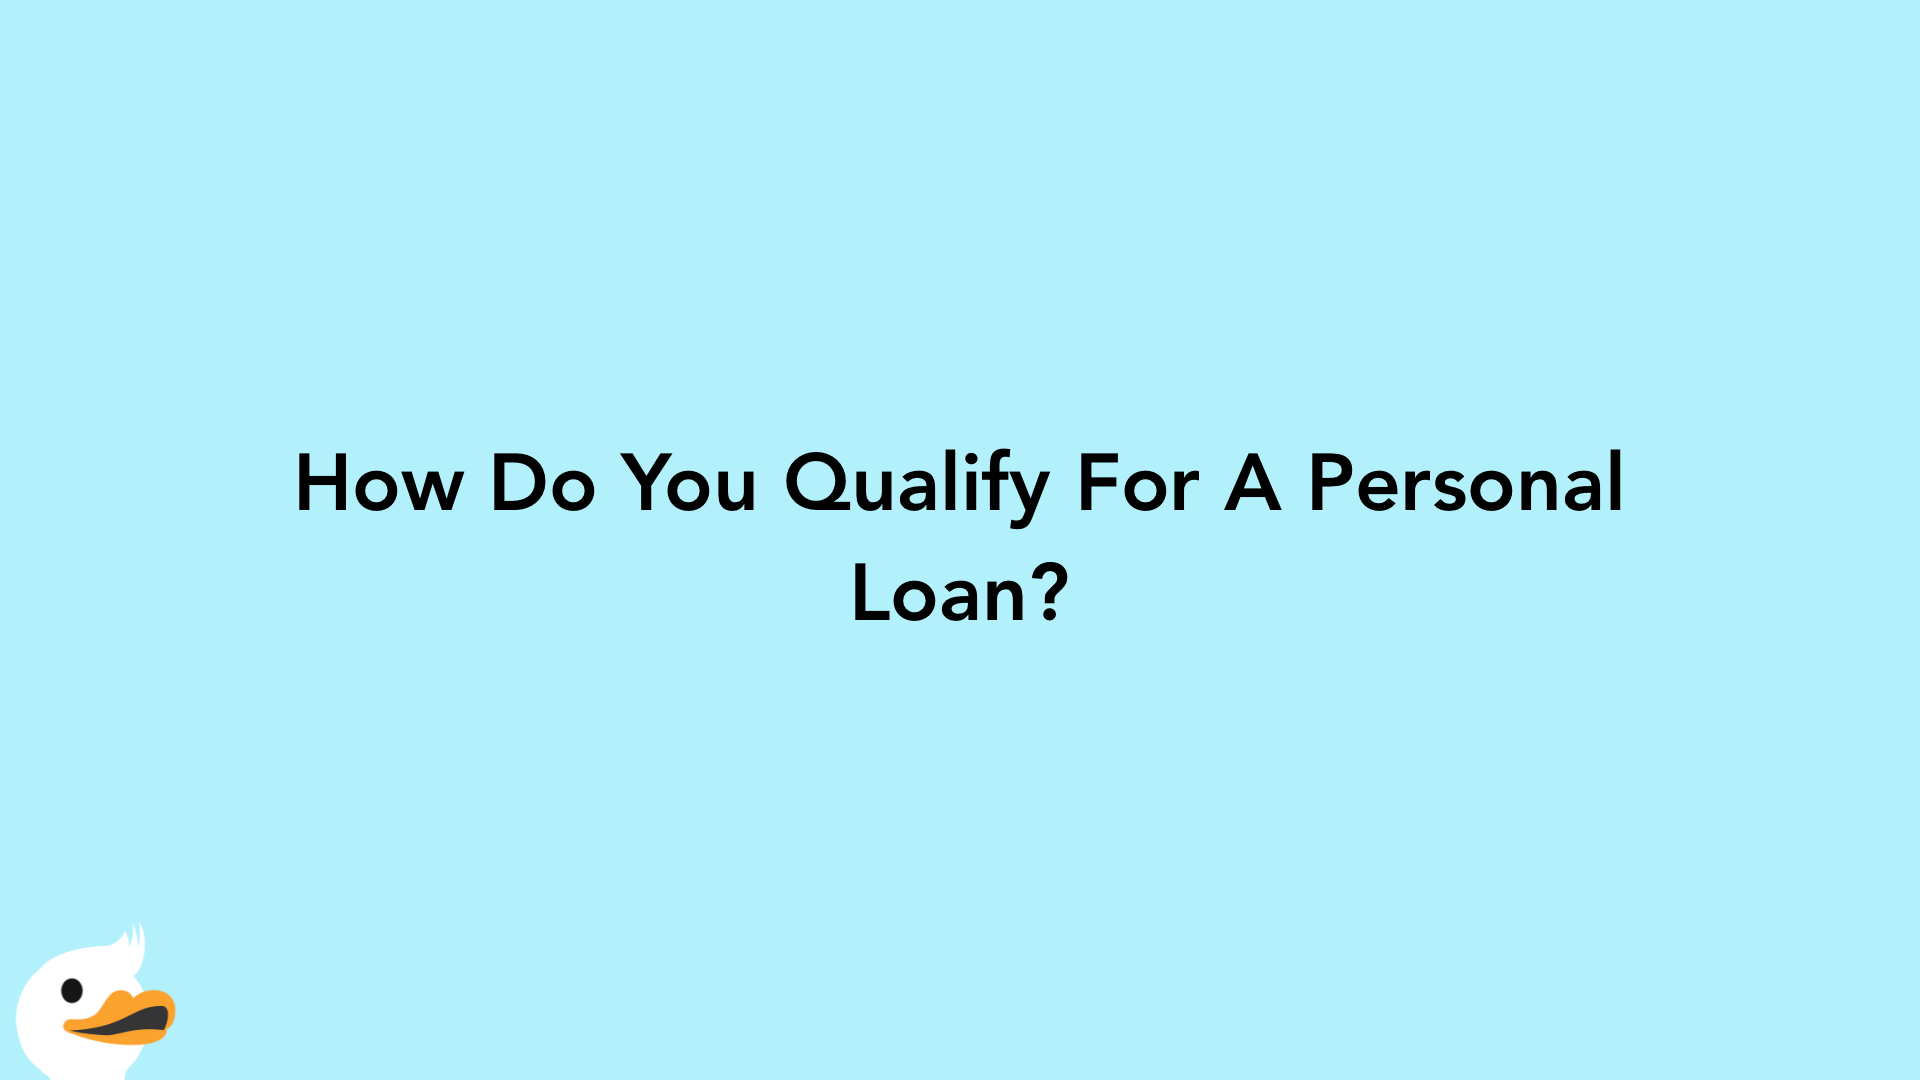 How Do You Qualify For A Personal Loan?